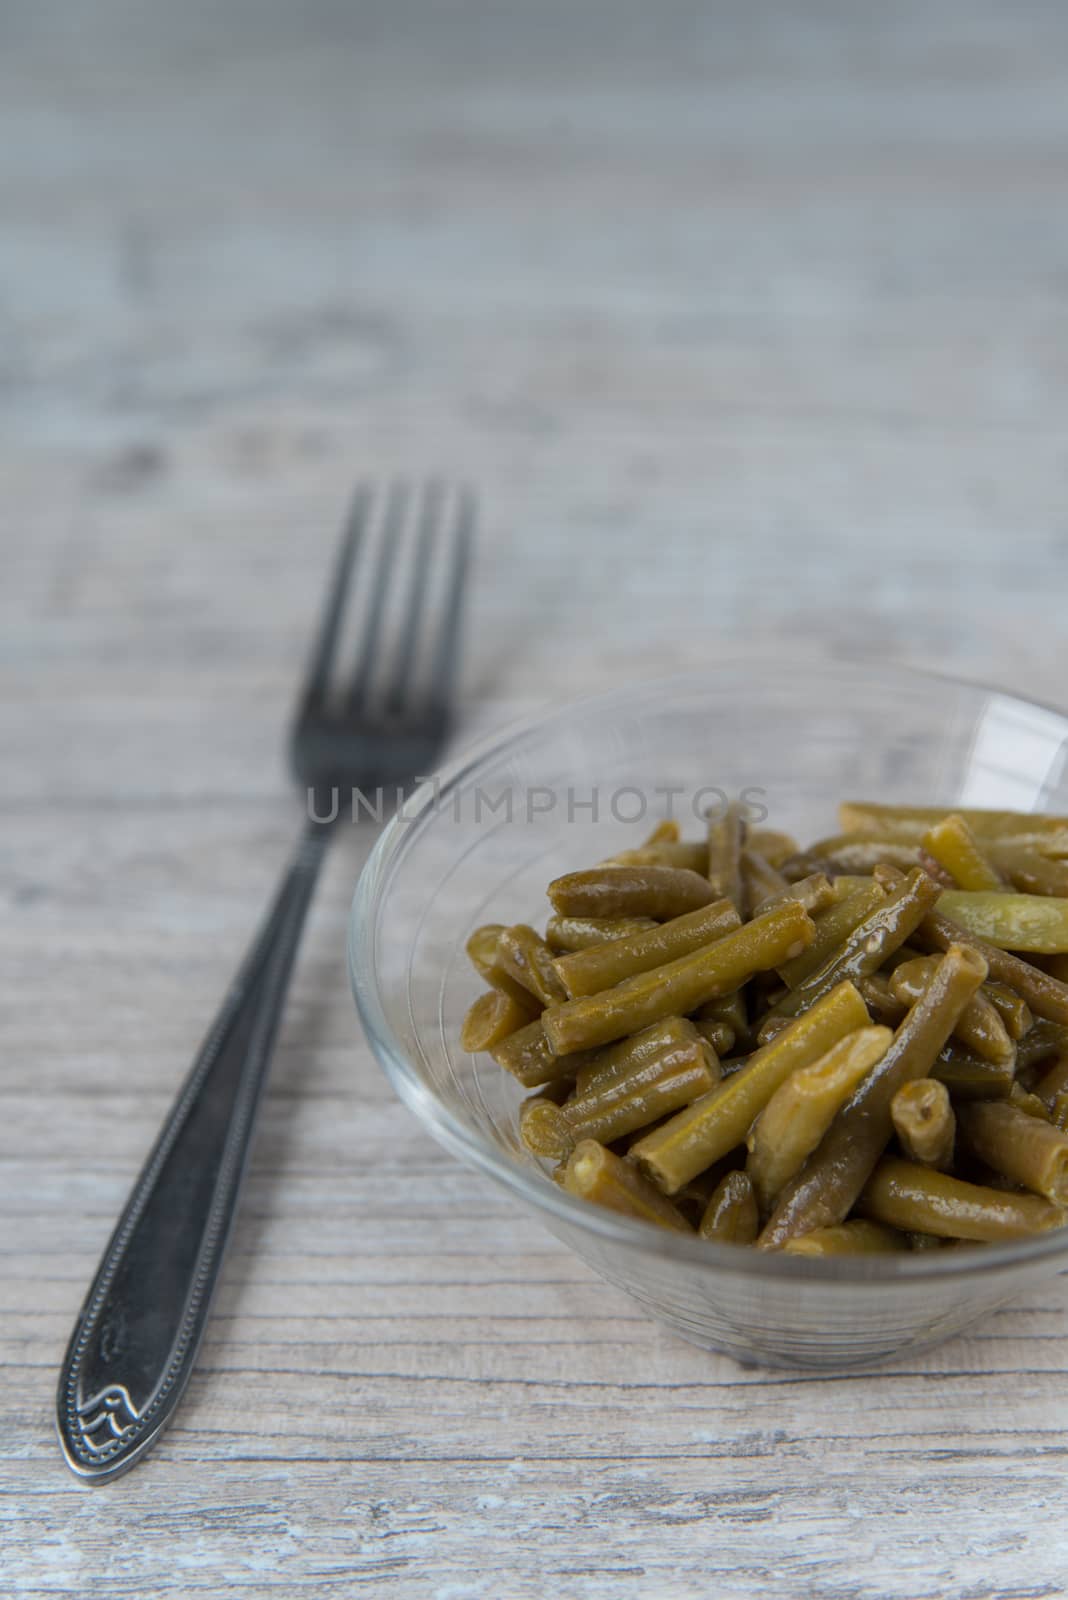 Plate of the green beans and fork by Linaga